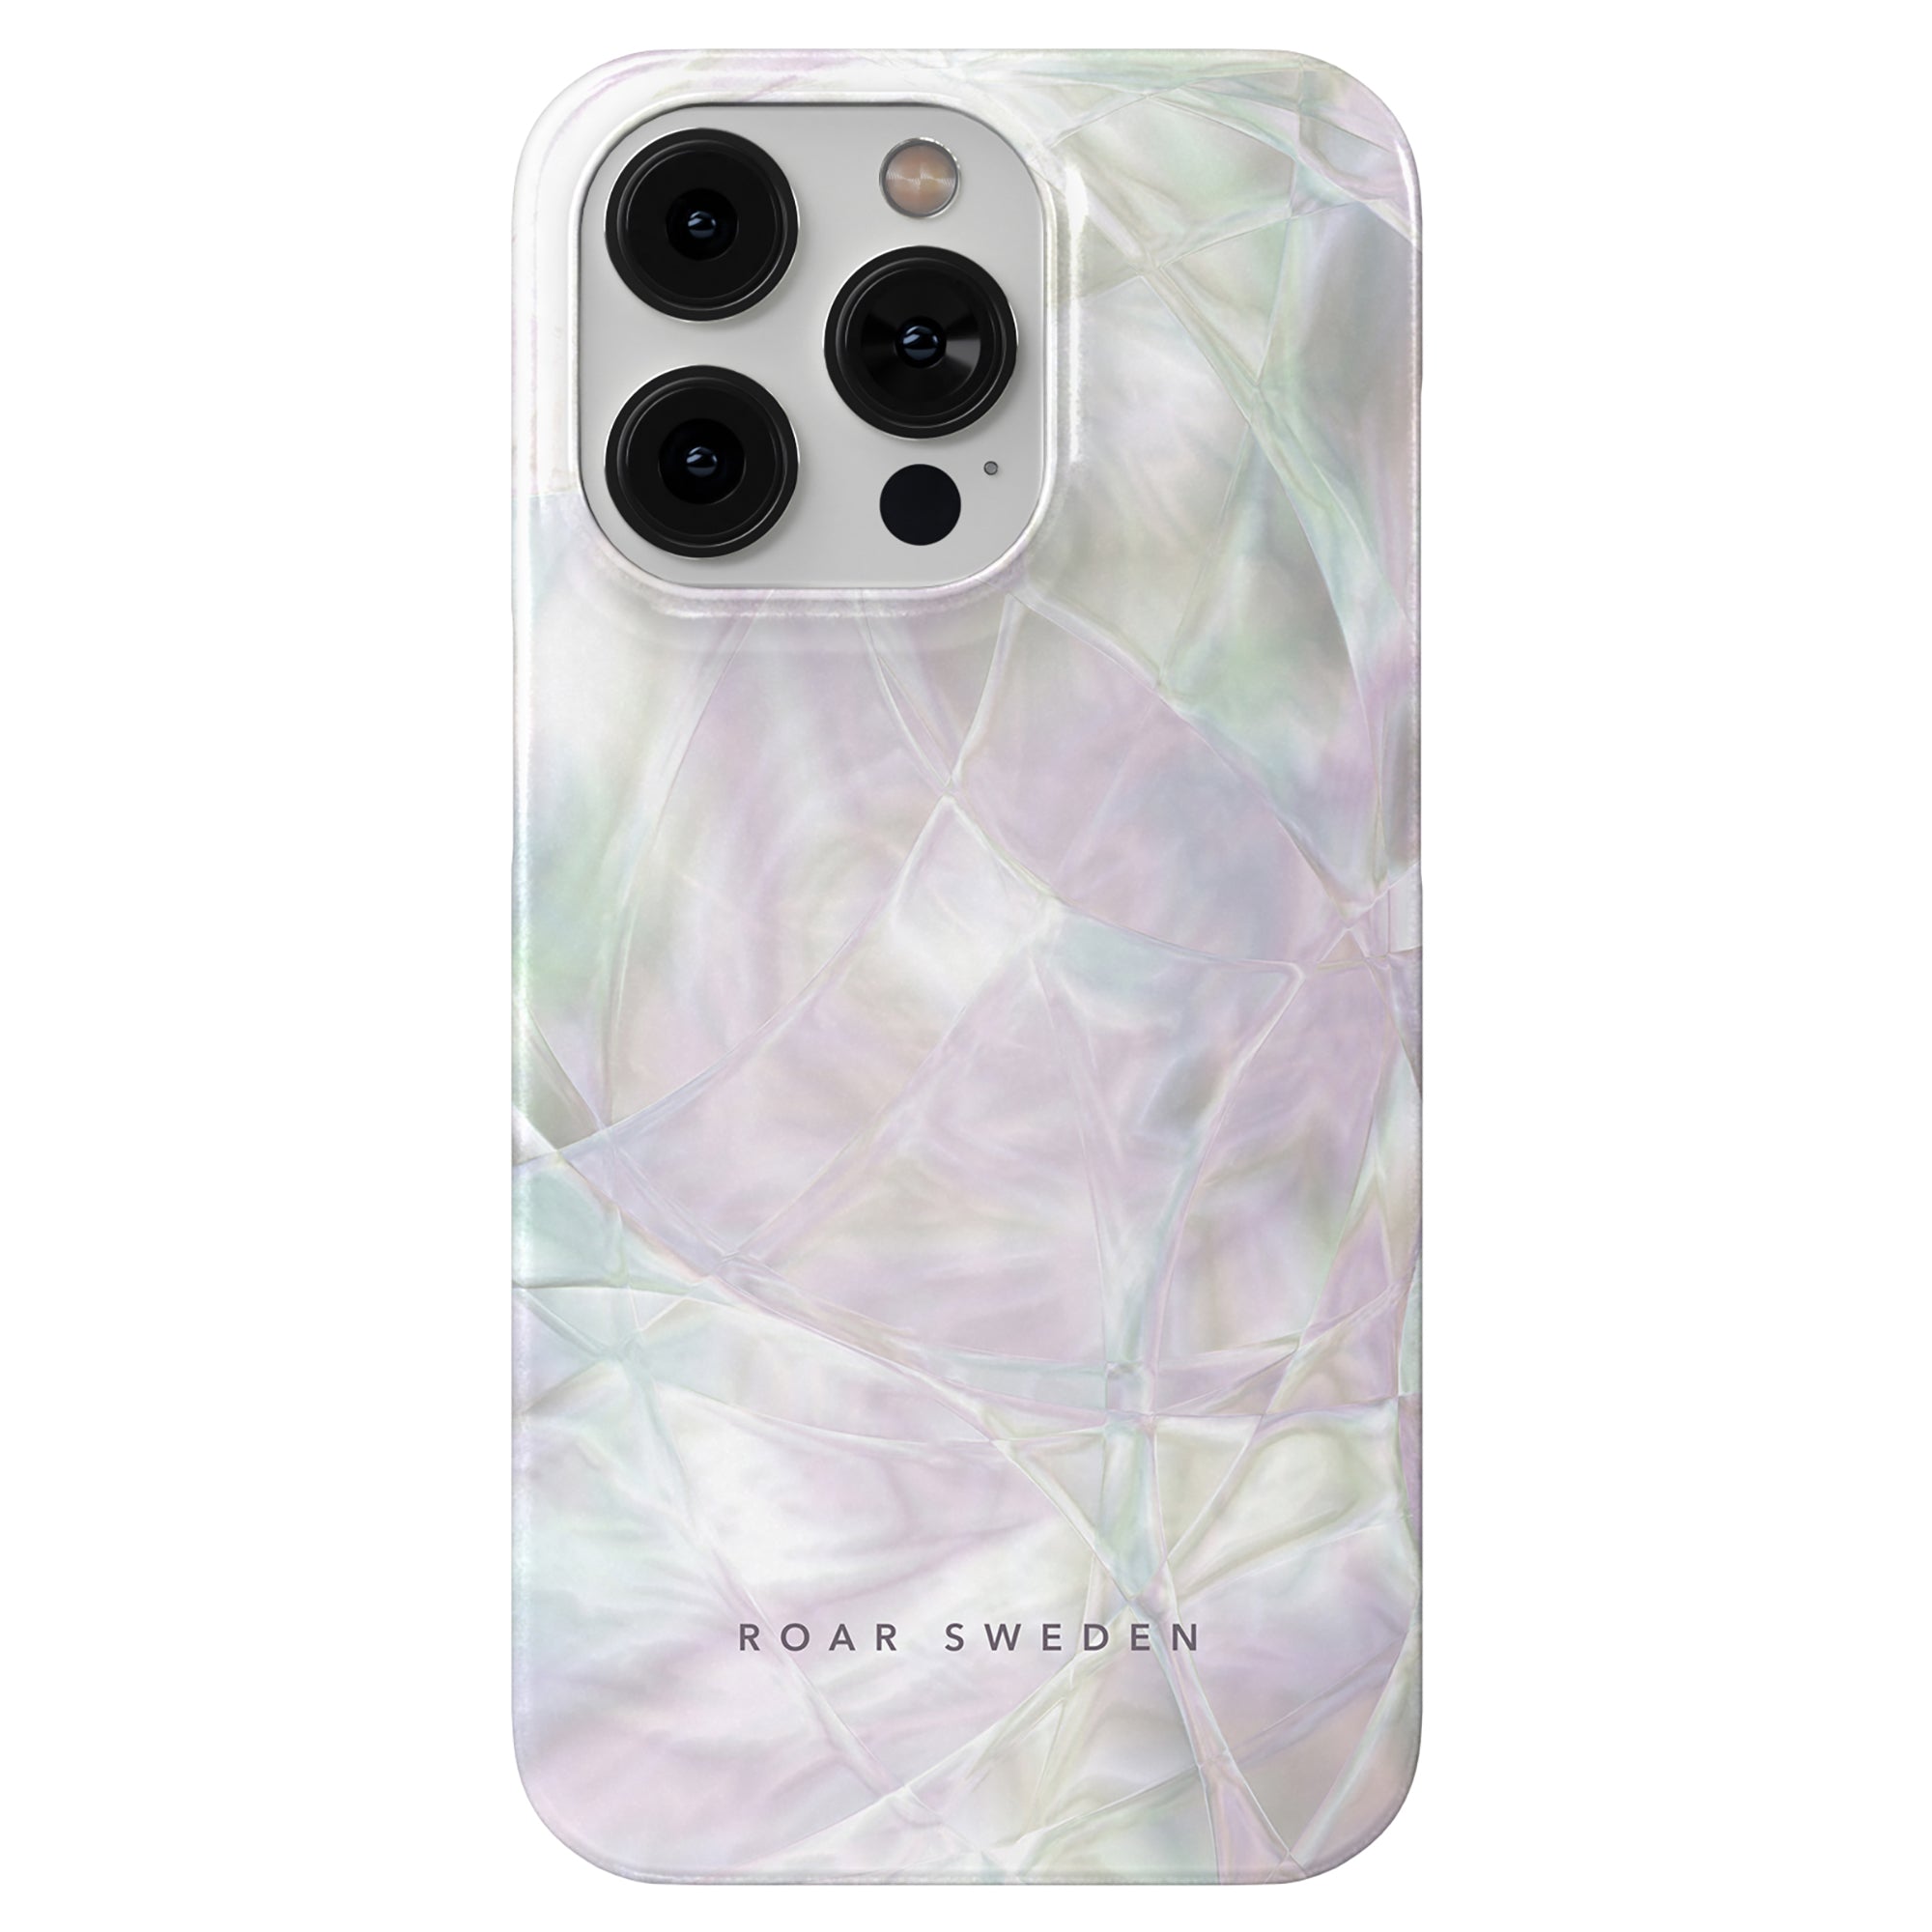 A Mauve - Slim case with a pearlescent design and three camera cutouts, branded with "roar sweden" at the bottom.